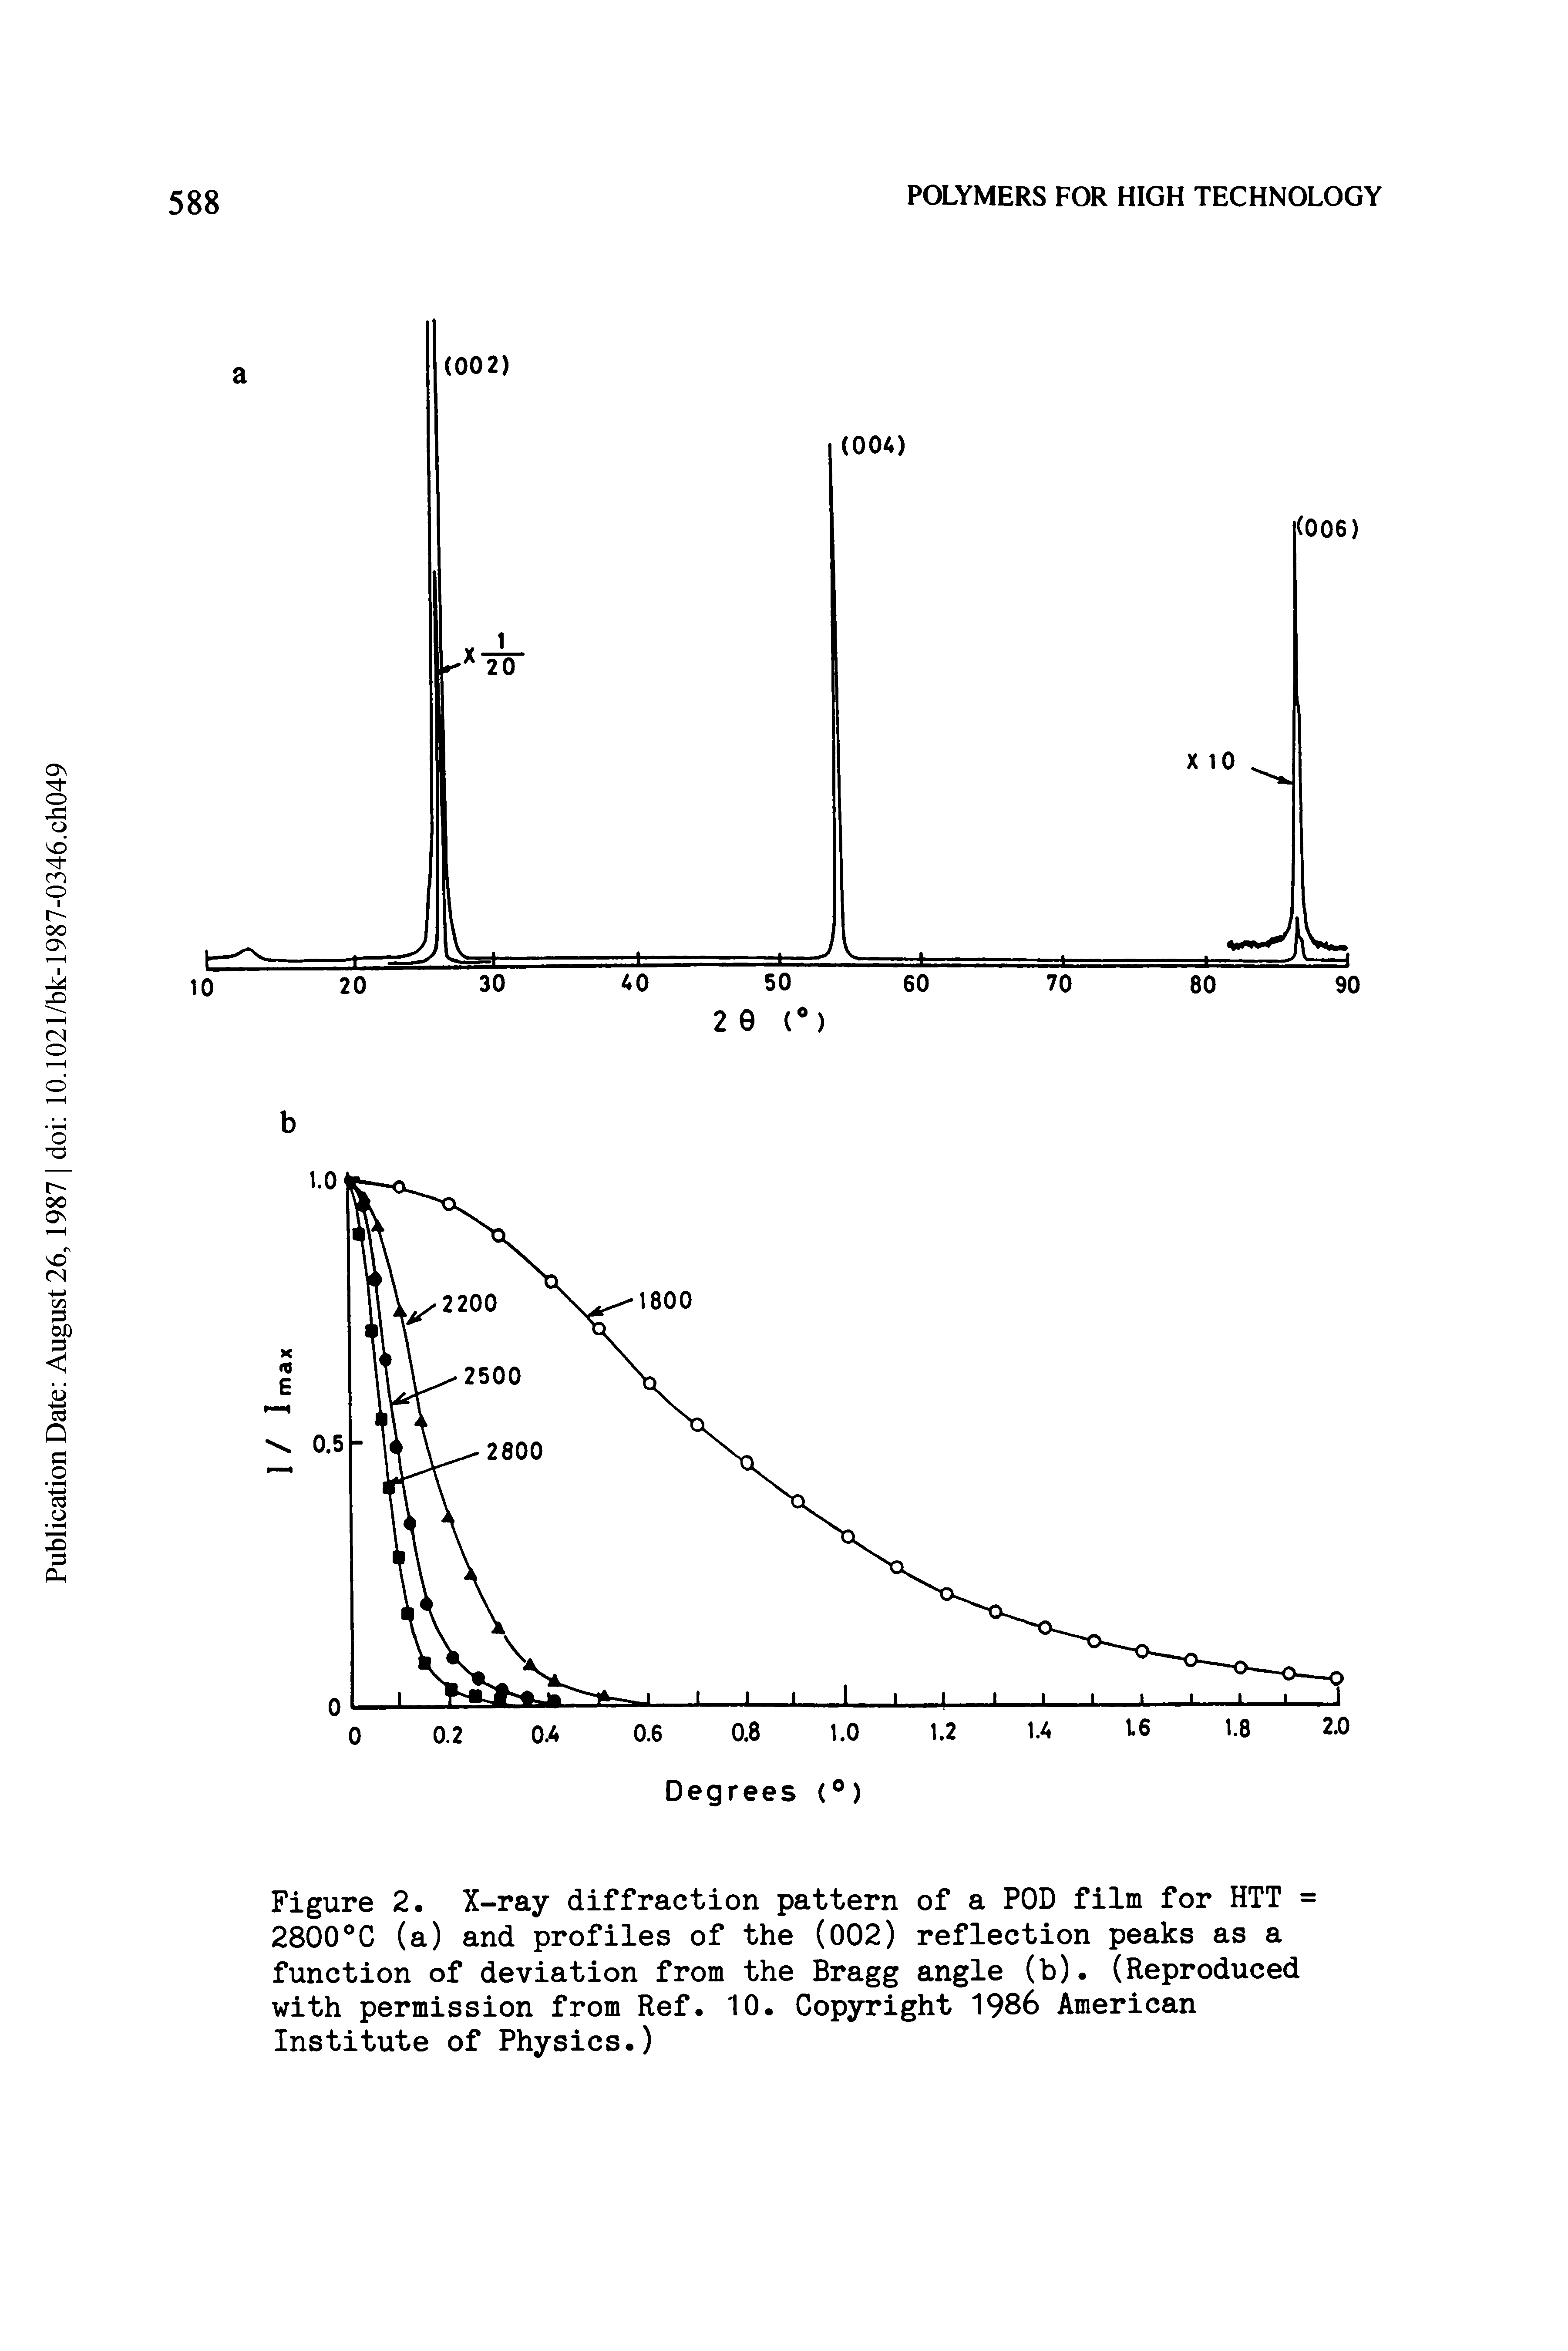 Figure 2. X-ray diffraction pattern of a POD film for HTT = 2800 C (a) and profiles of the (002) reflection peaks as a function of deviation from the Bragg angle (b). (Reproduced with permission from Ref. 10. Copyright 1986 American Institute of Physics.)...